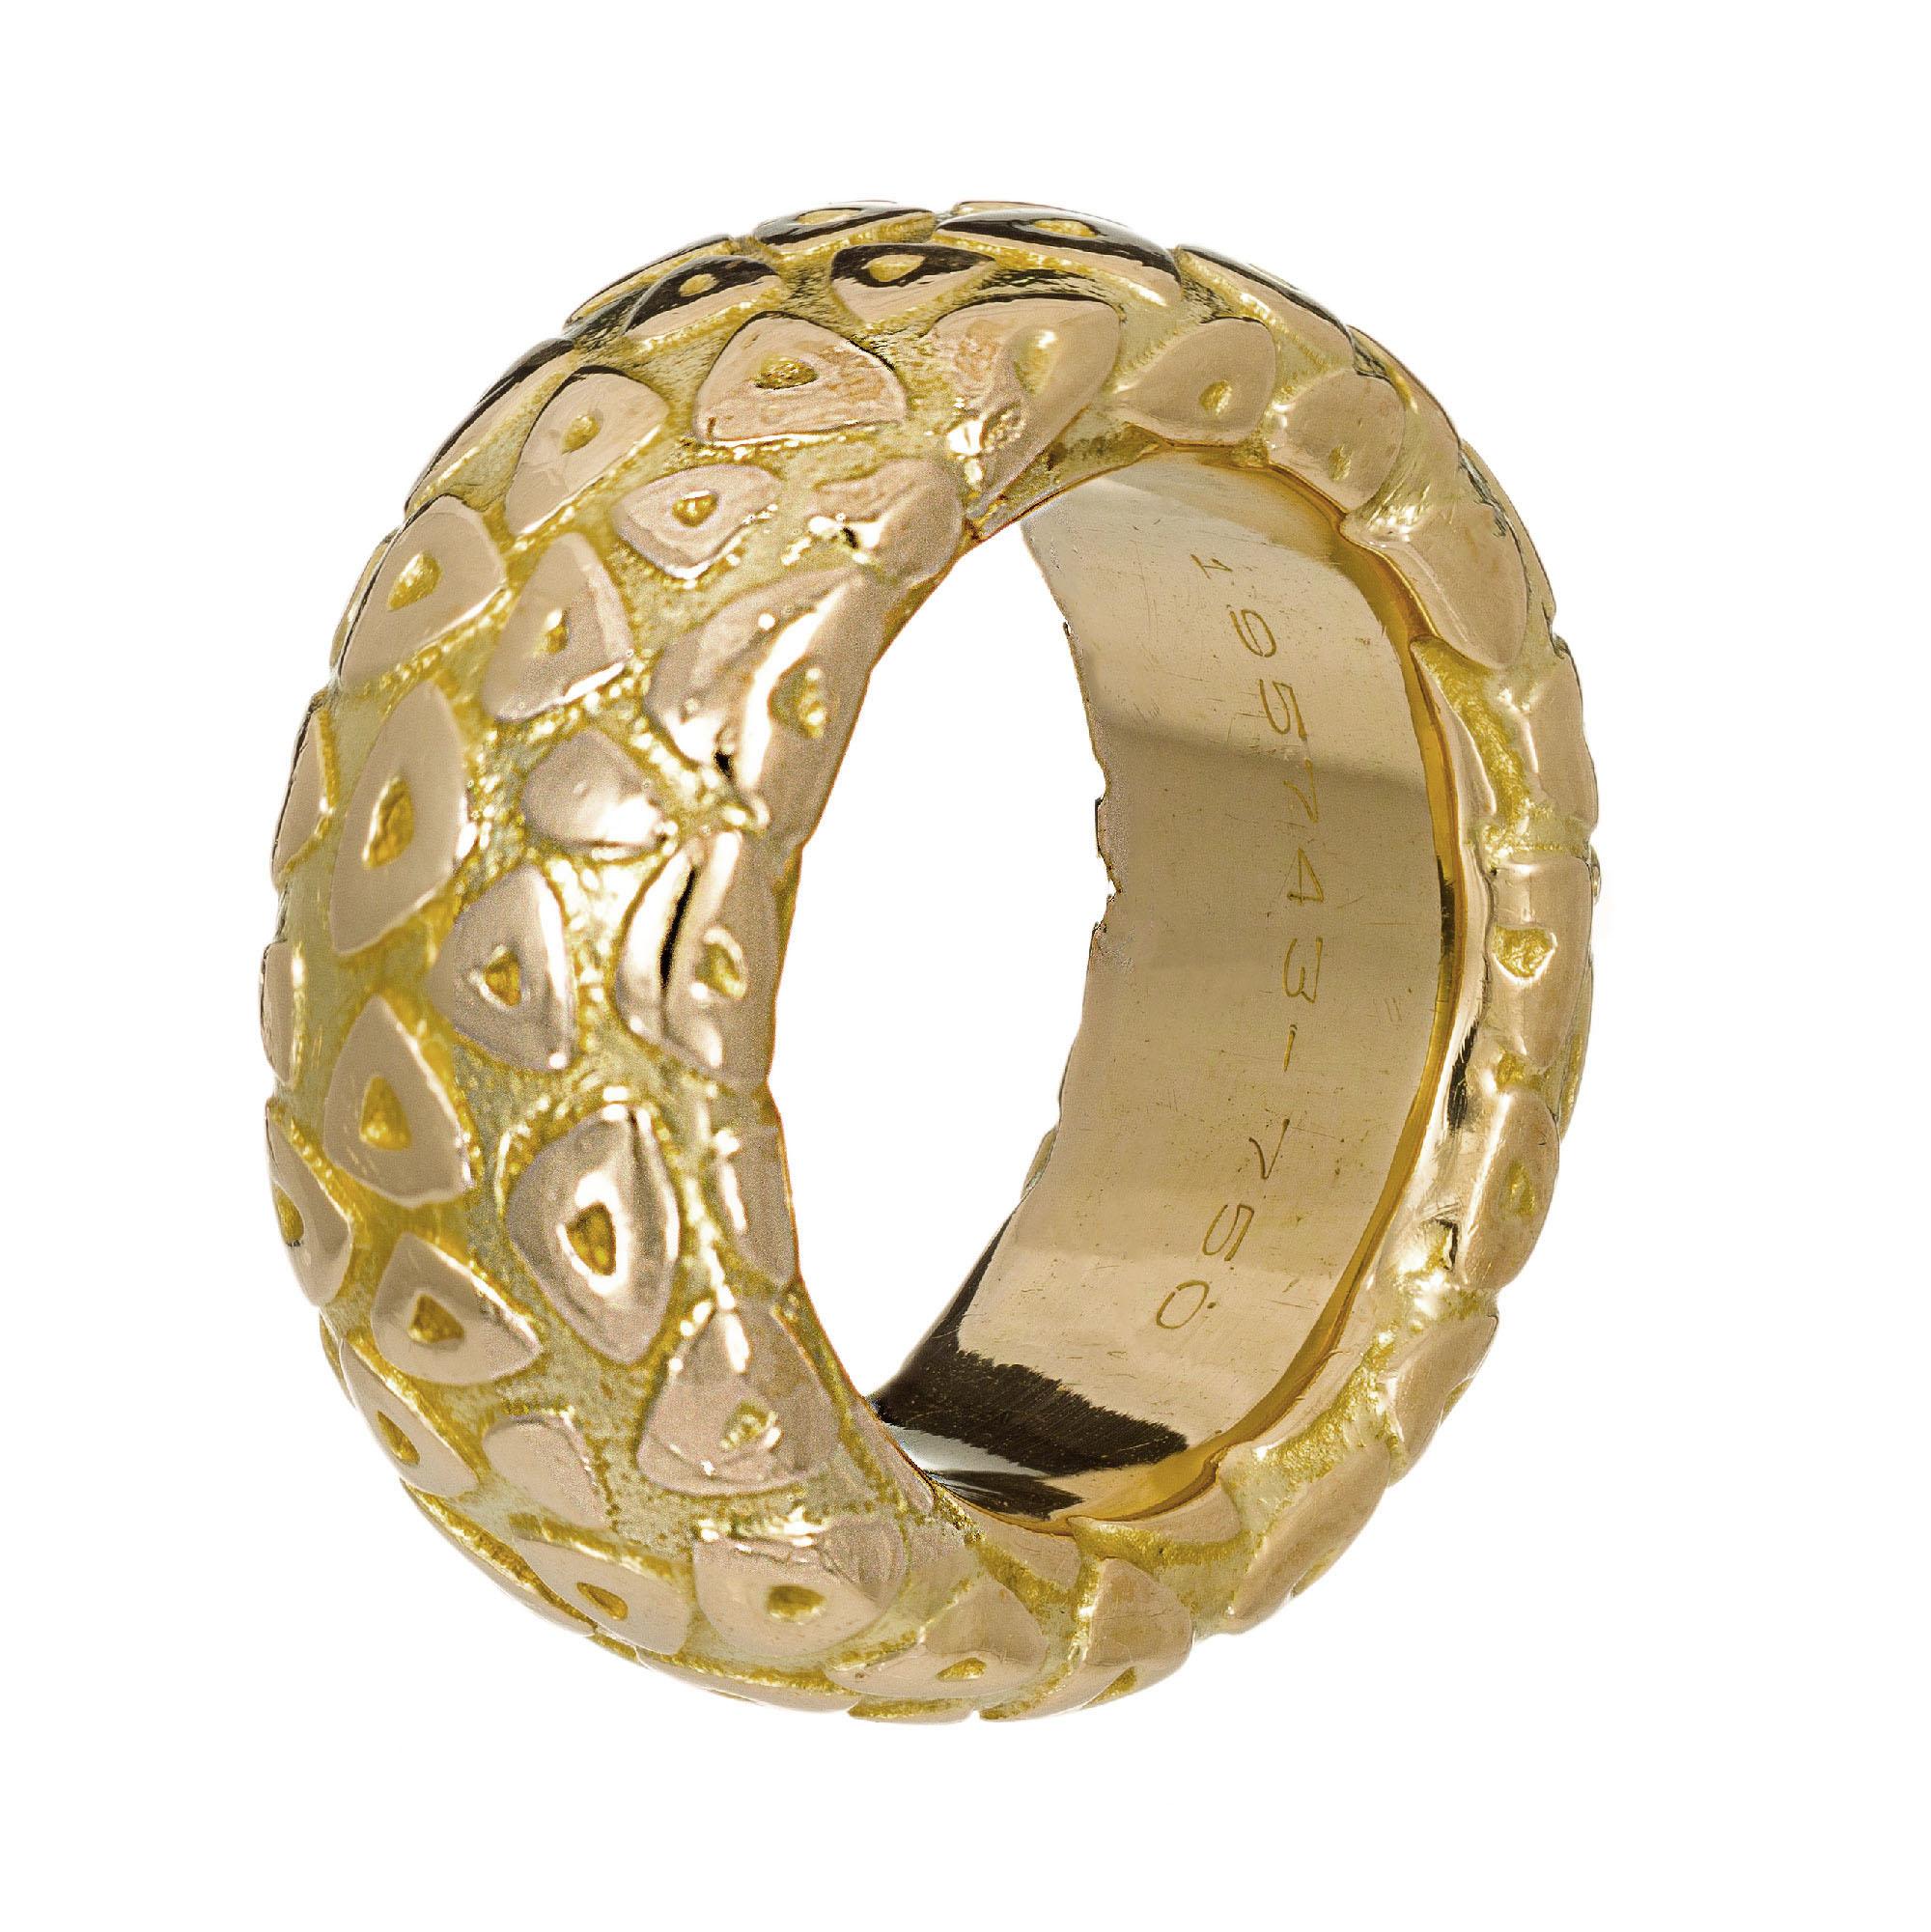 10mm Chamut Paris band ring with a triangle design in 18k yellow gold.

Size 6.25 and not sizable 
18k yellow gold 
Stamped: 750
Hallmark: Chamut Paris 195743
18.9 grams
Width at top: 10mm
Height at top: 4.4mm
Width at bottom: 10mm

